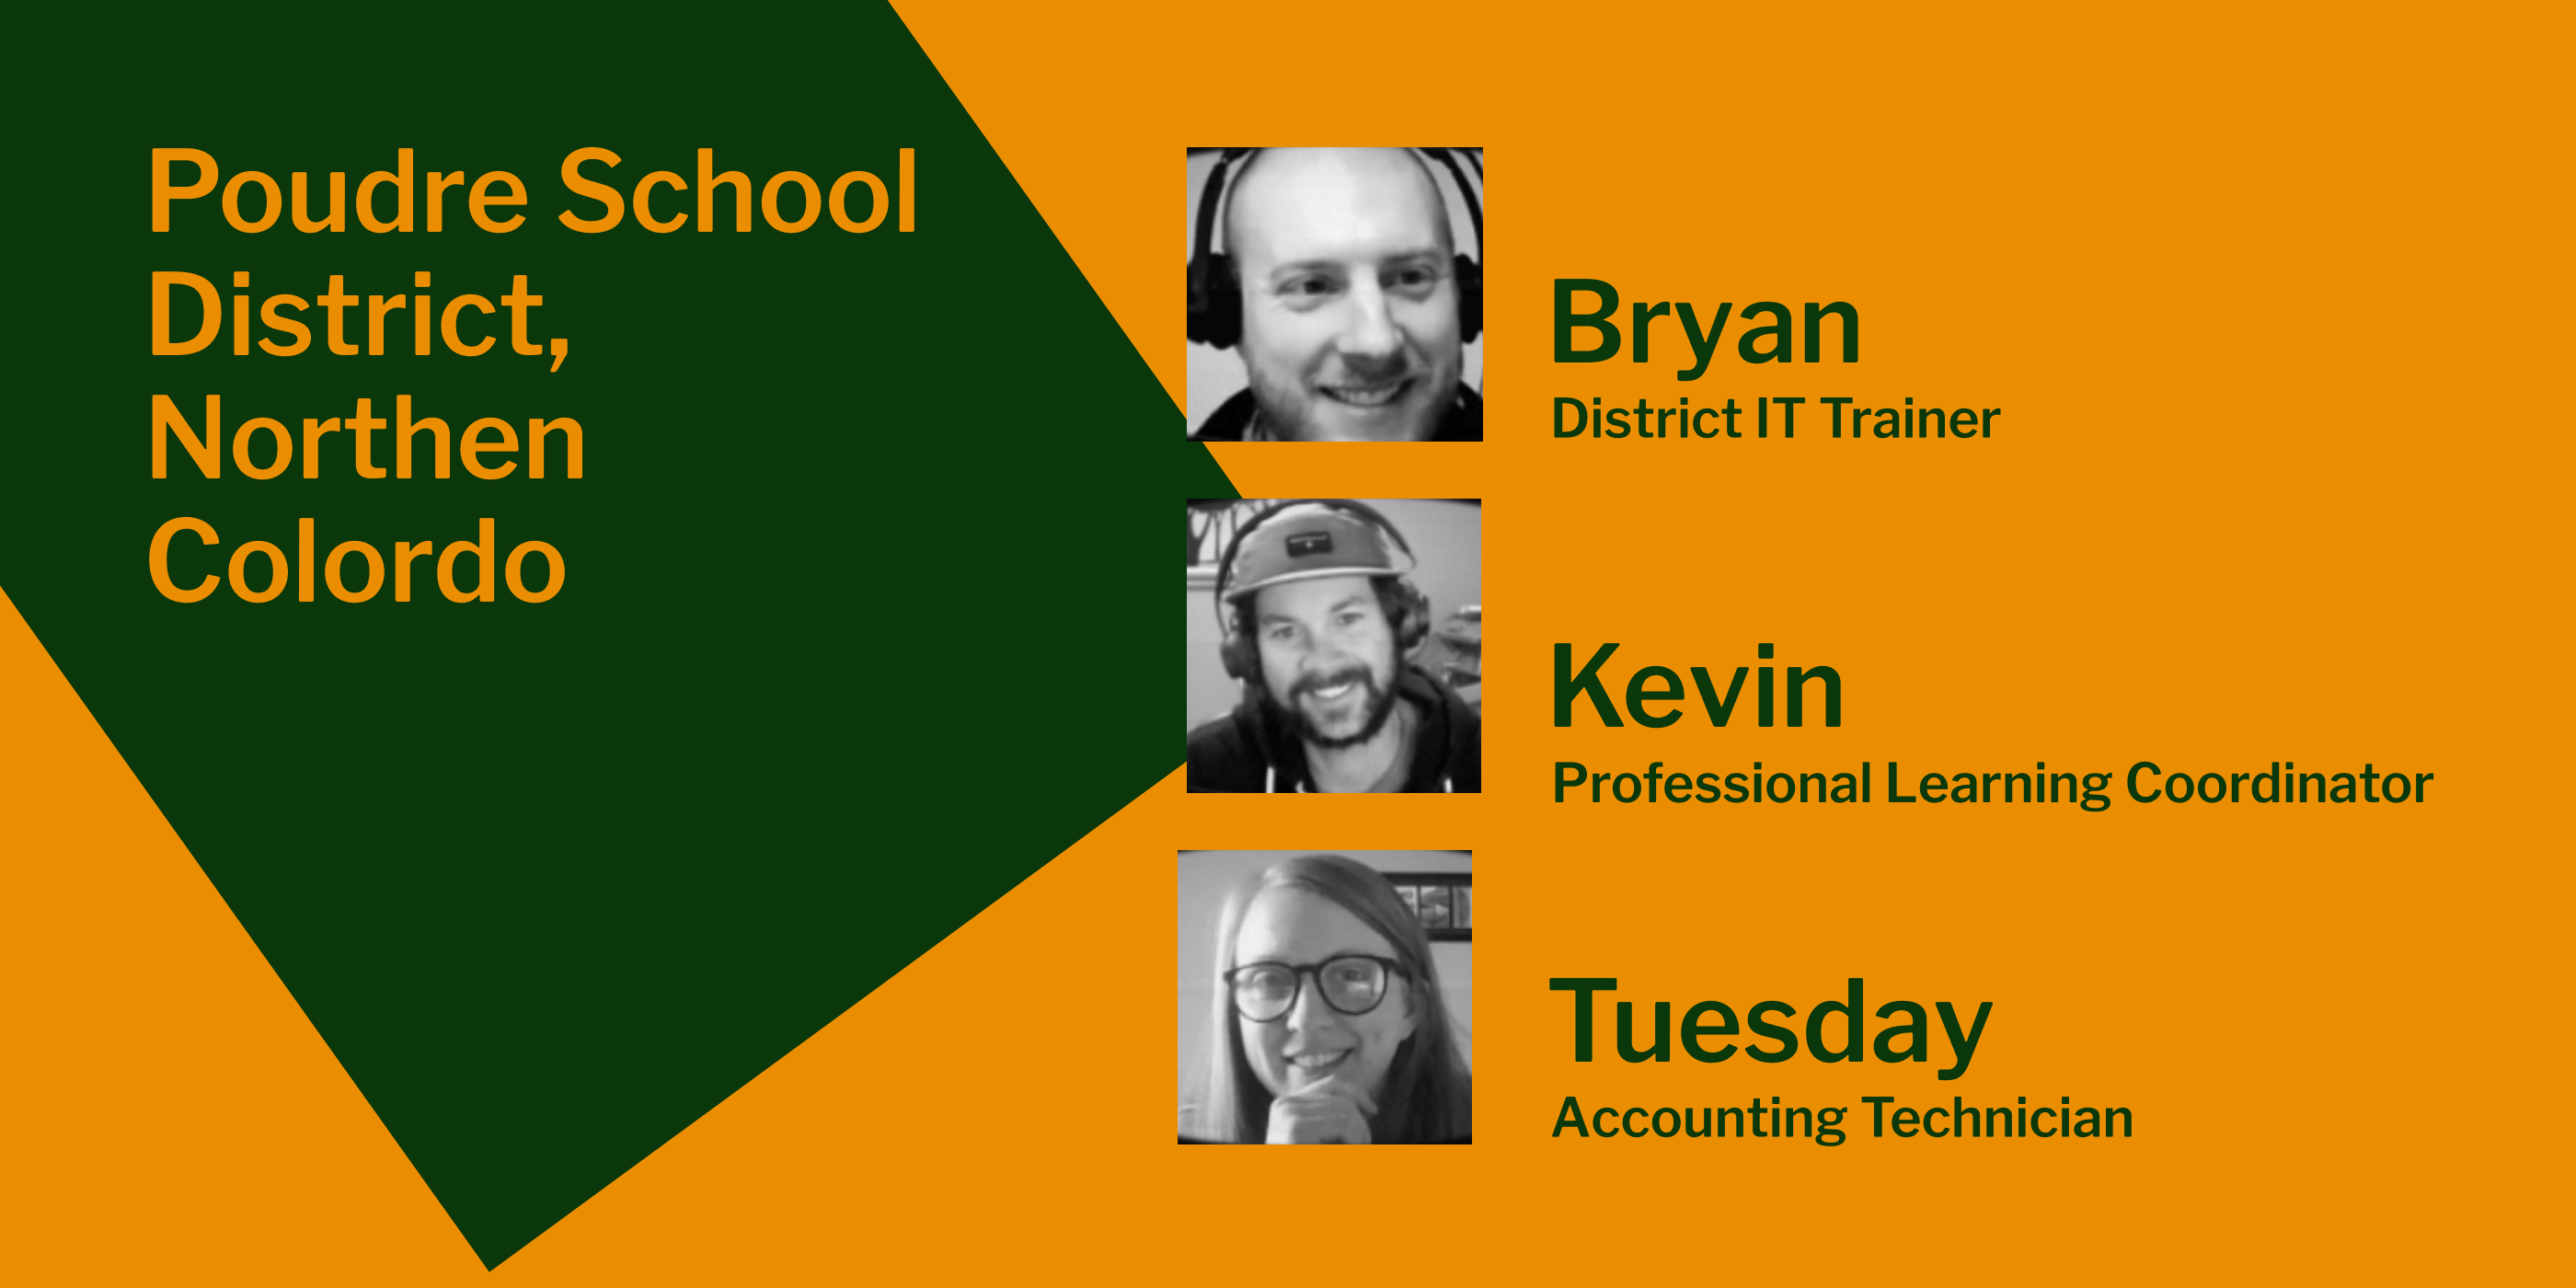 Tuesday, Bryan, & Kevin: Poudre School District